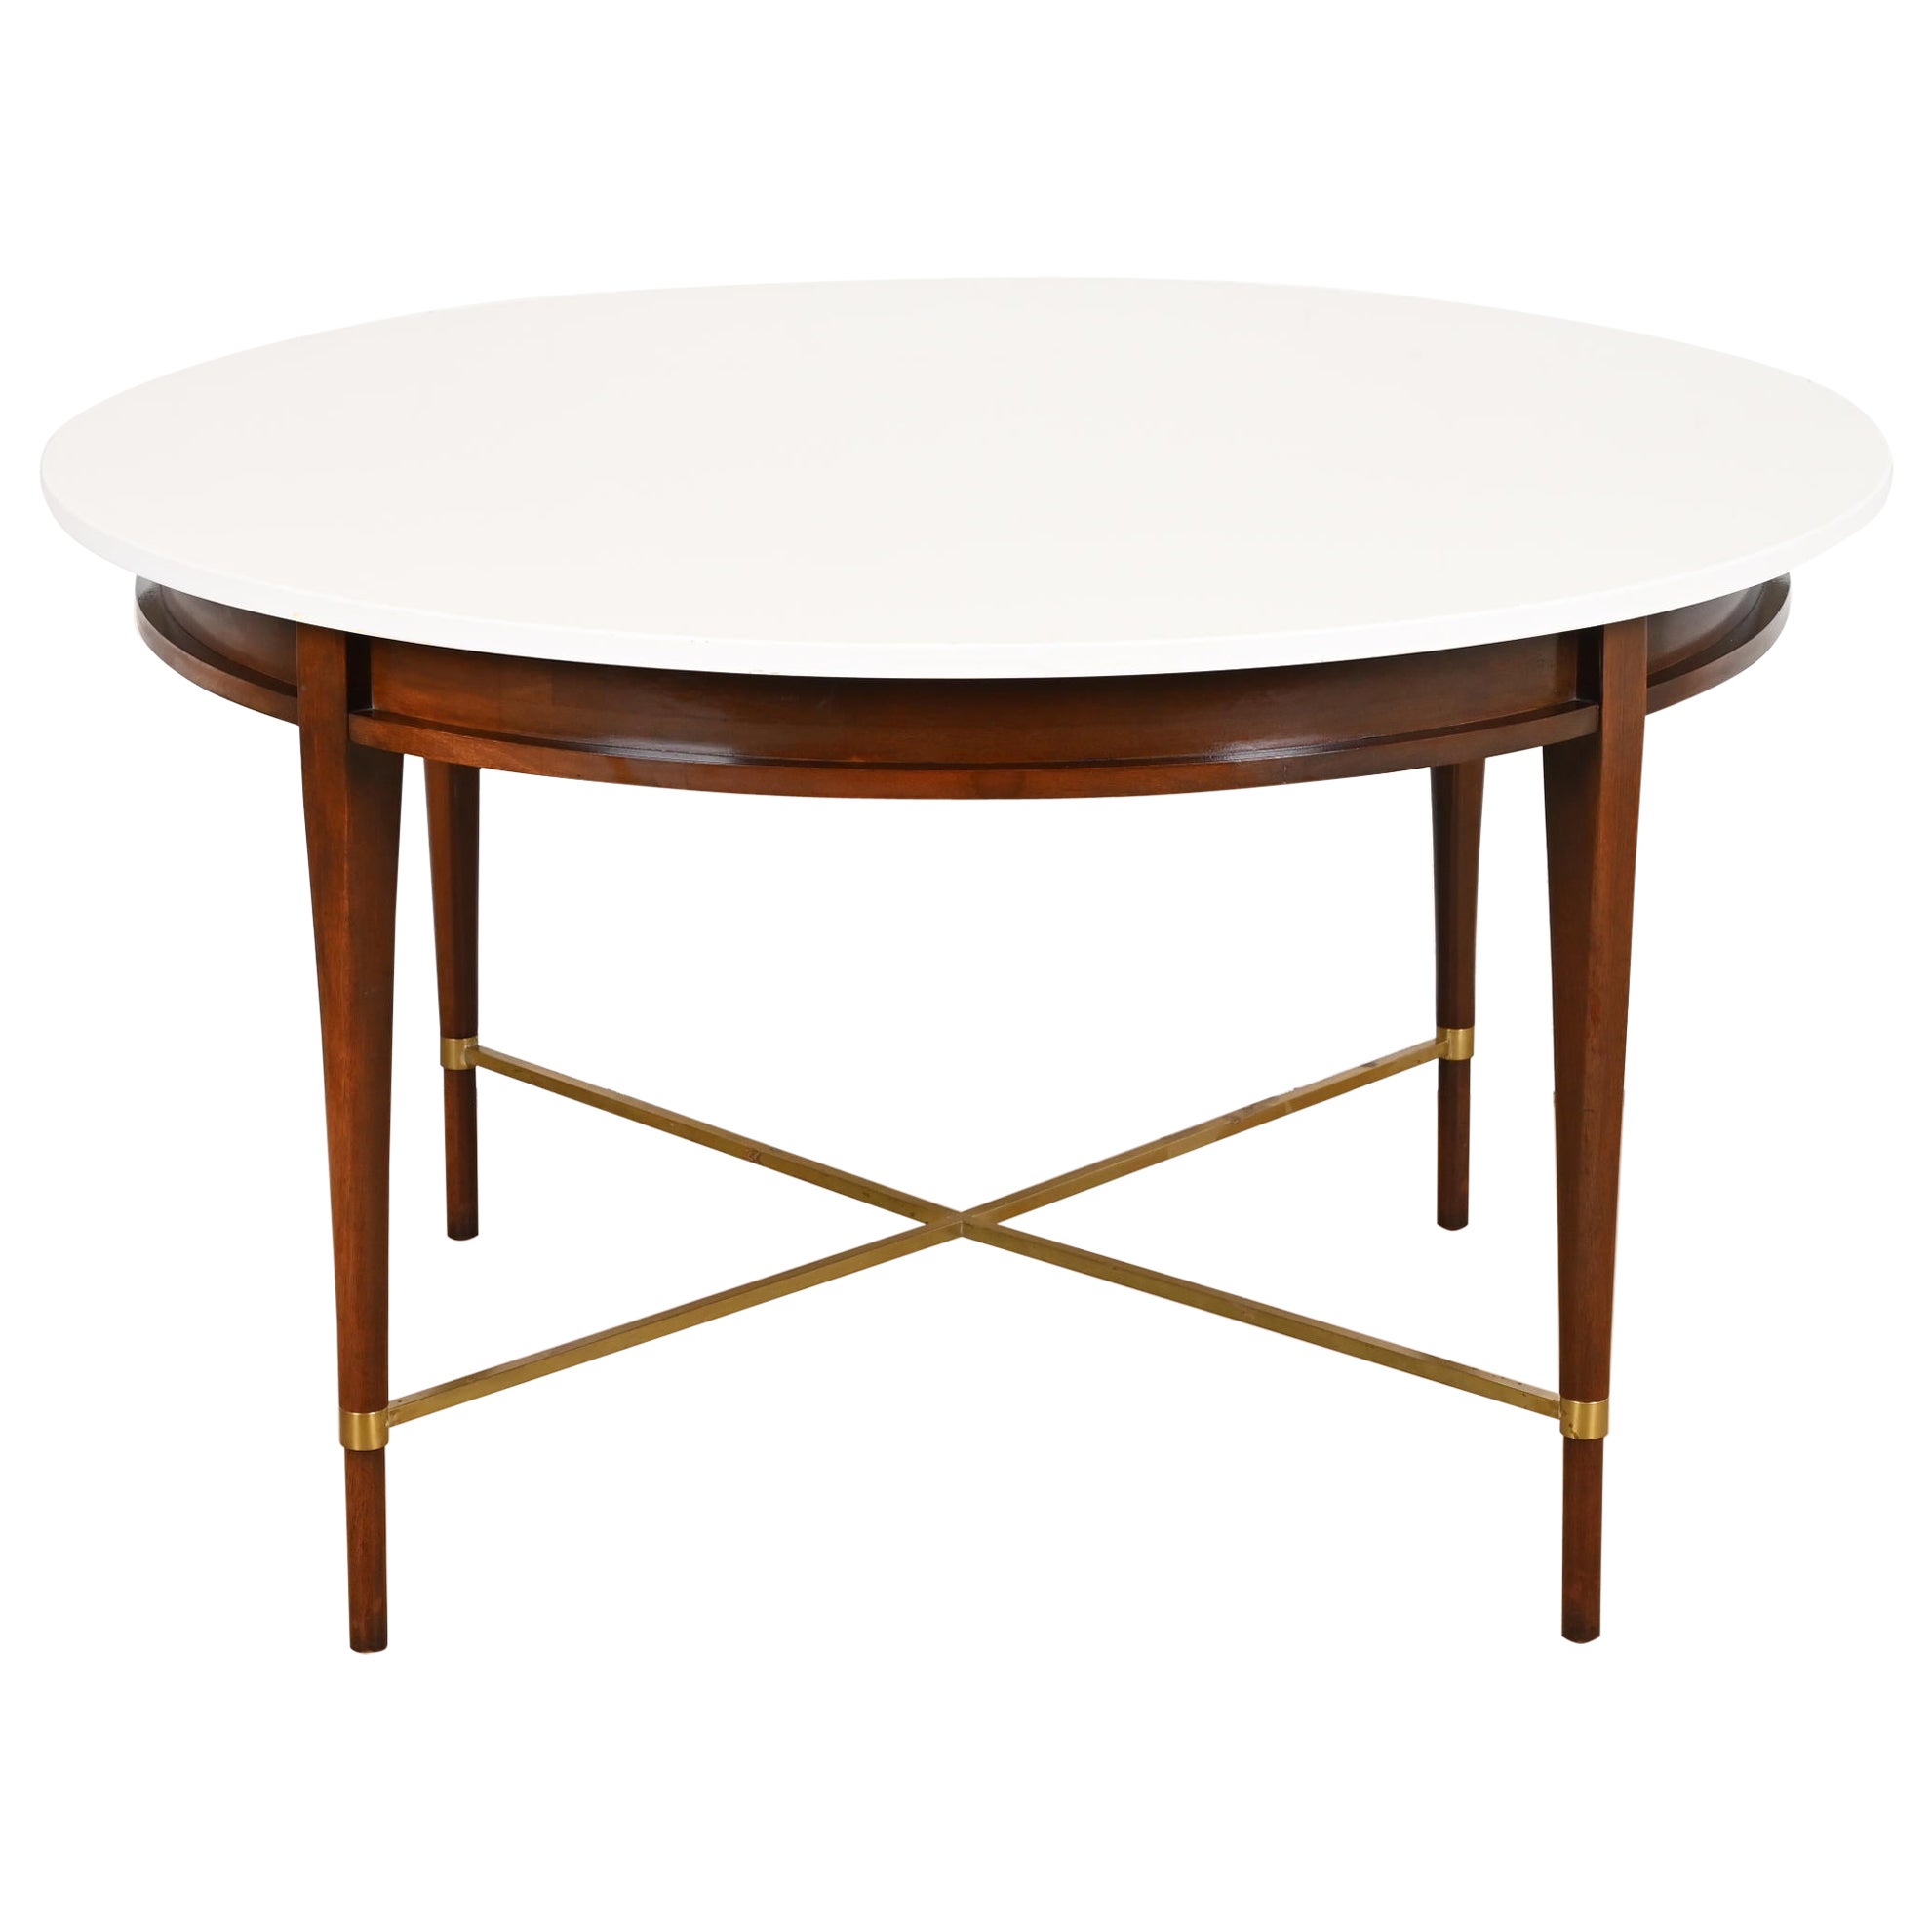 Paul McCobb Irwin Collection Mahogany and Brass Round Dining Table or Game Table